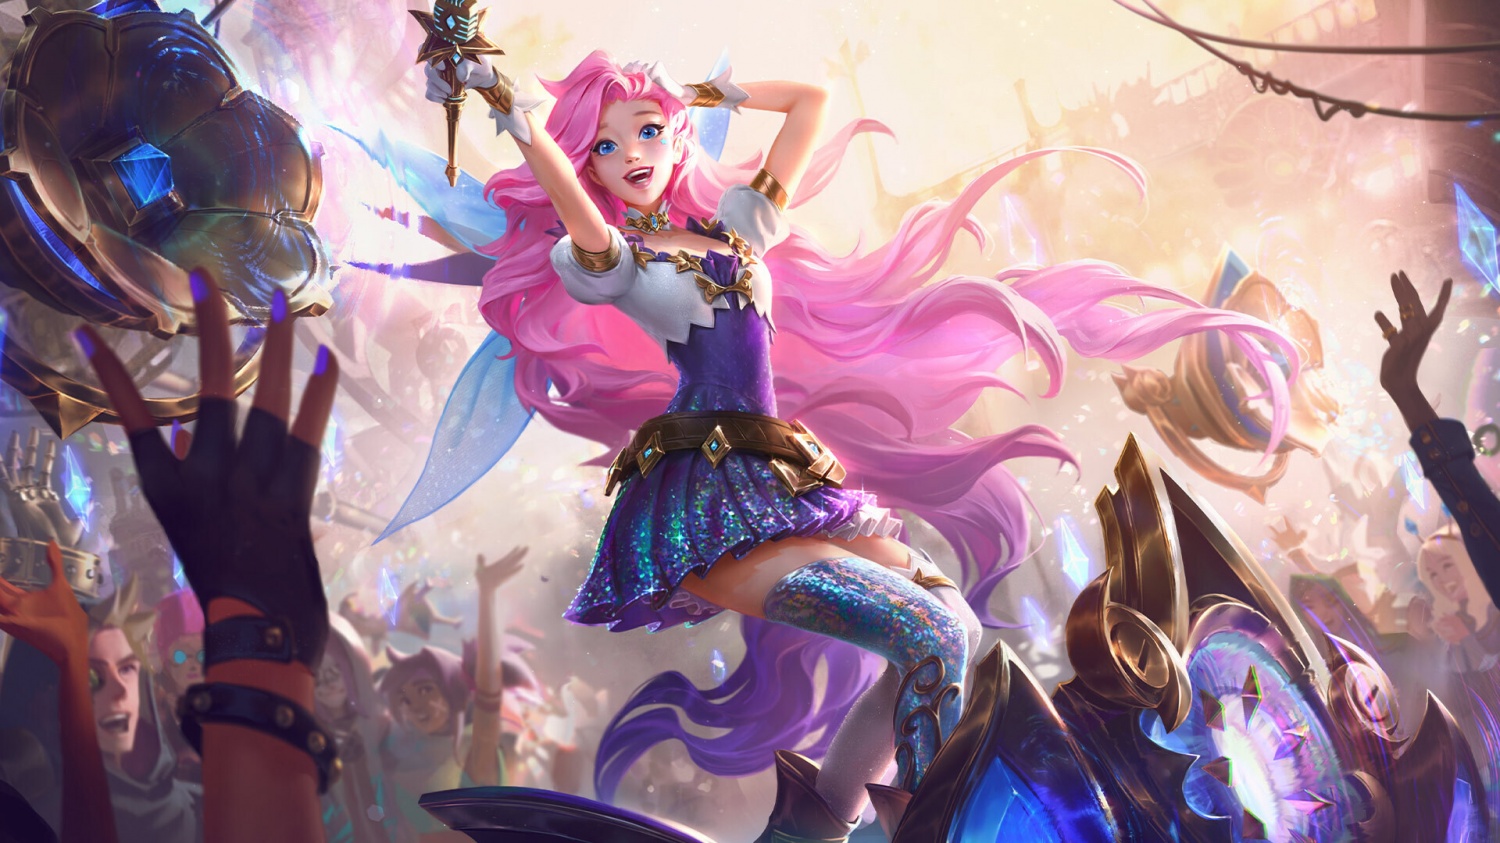 Artist claims League of Legends champion Seraphine is based on her